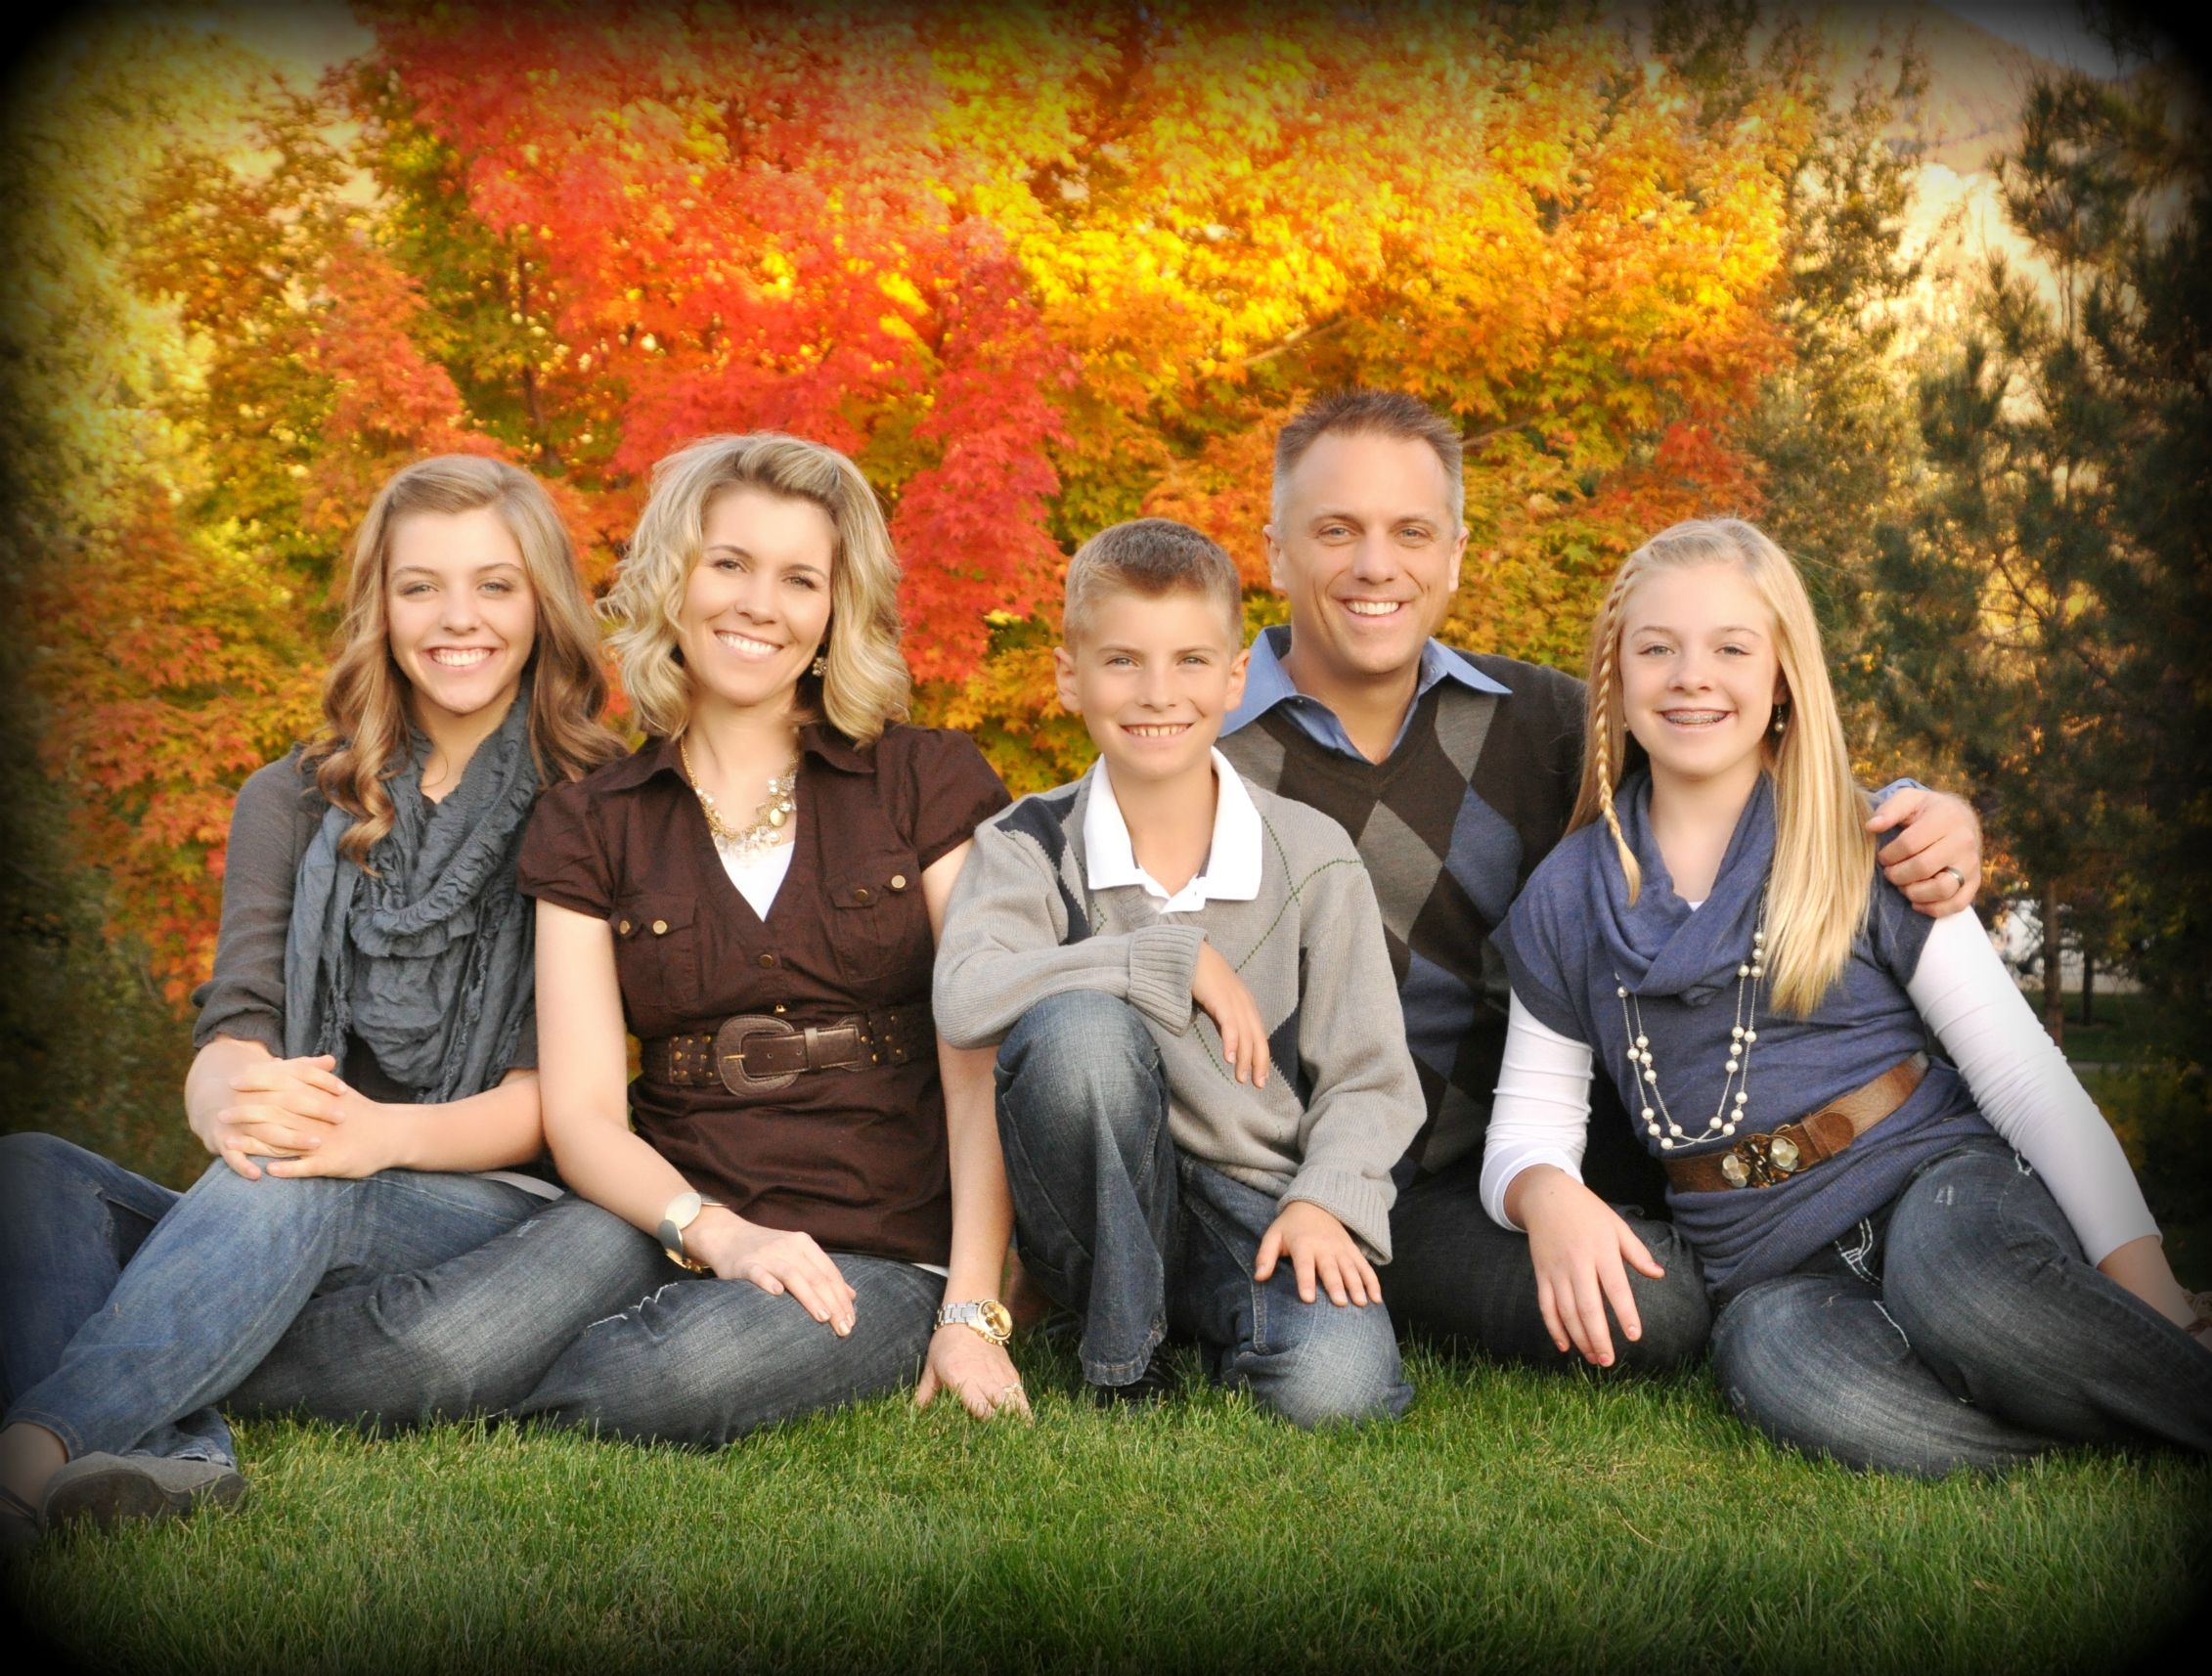 Cute family pose idea | Fall Family pictures www.cheapshotsllc.com ...